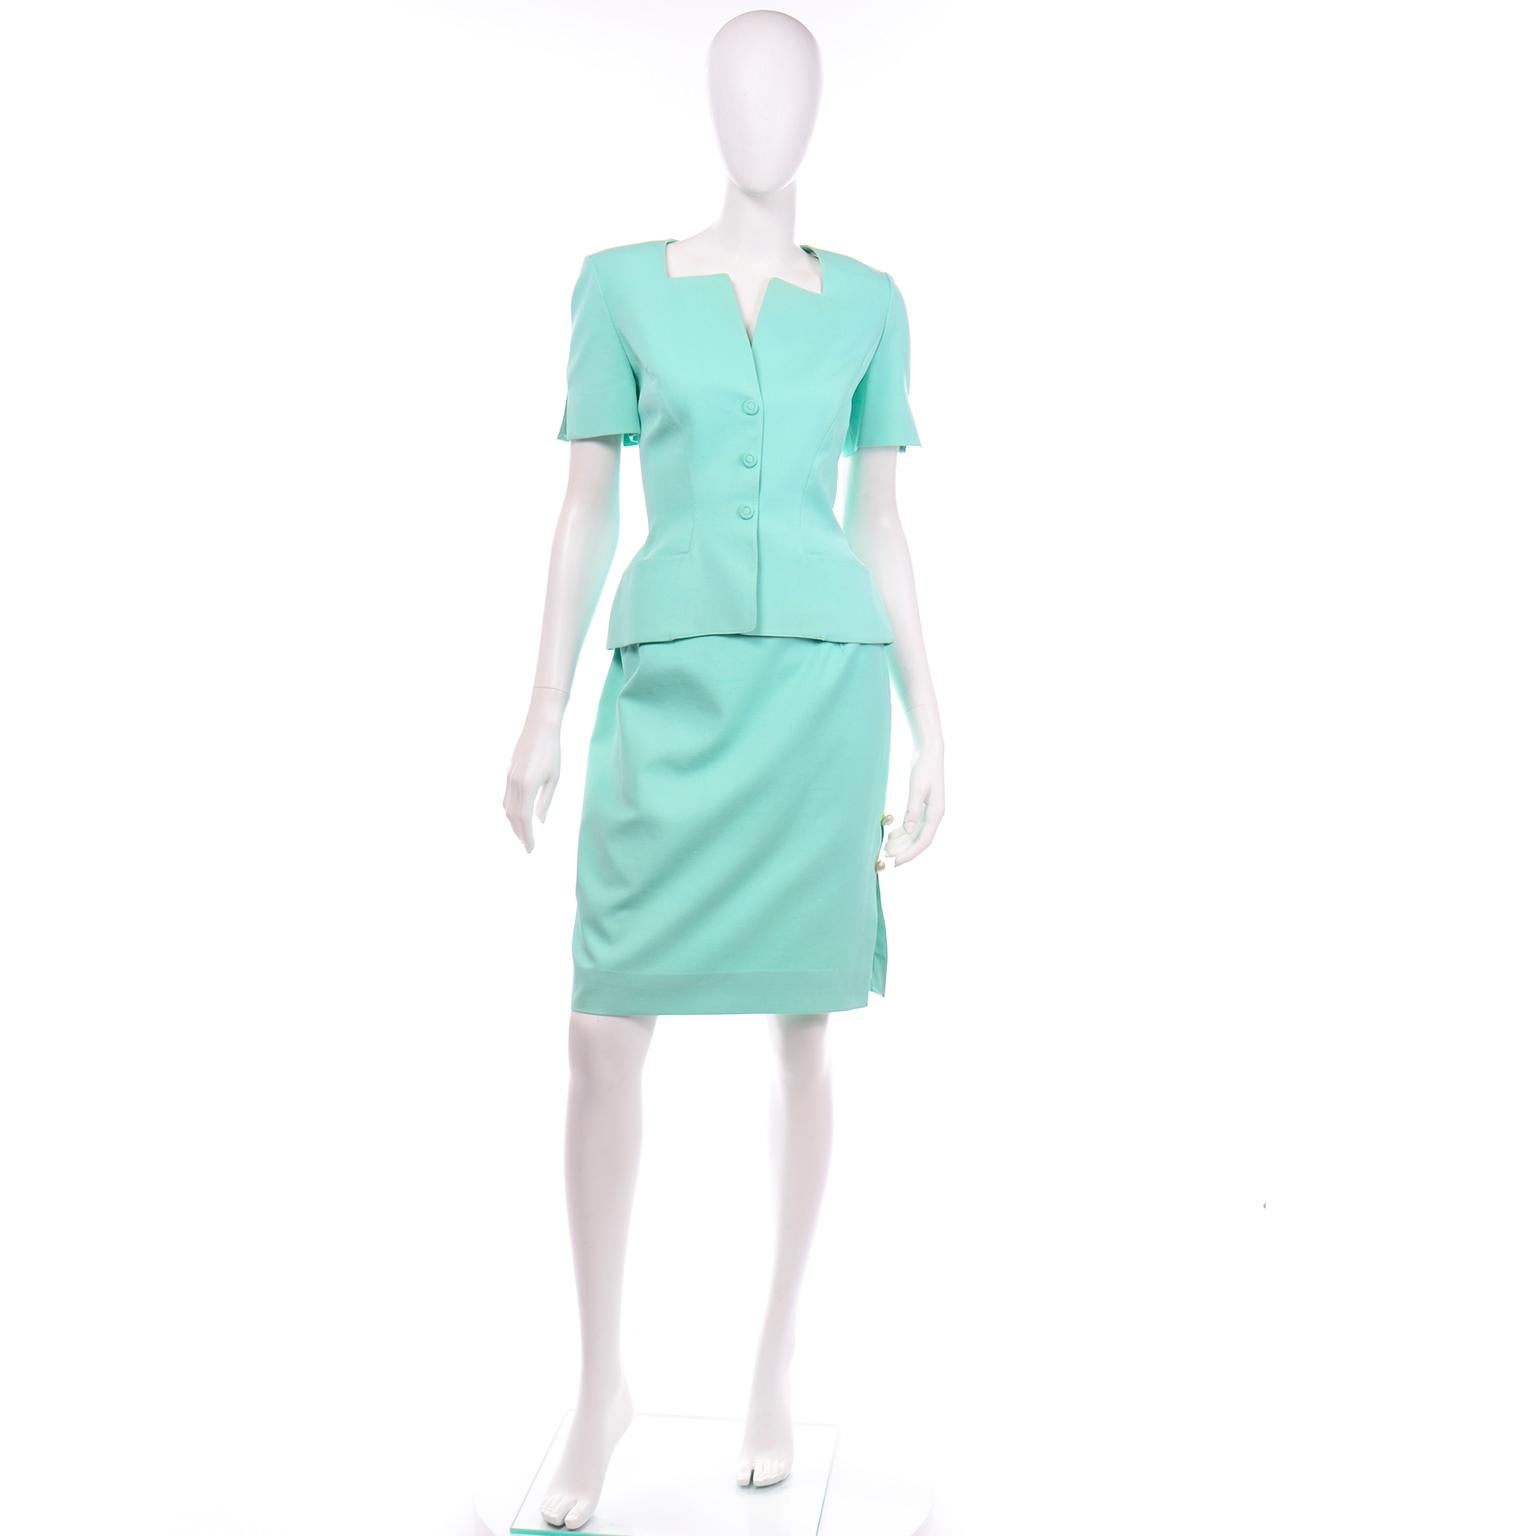 This vintage Thierry Mugler textured short sleeve skirt suit is in such a beautiful shade of mint green!  The jacket top is short sleeve and has shoulder pads for structure and a slight  peplum. This suit has the iconic Mugler silhouette with the